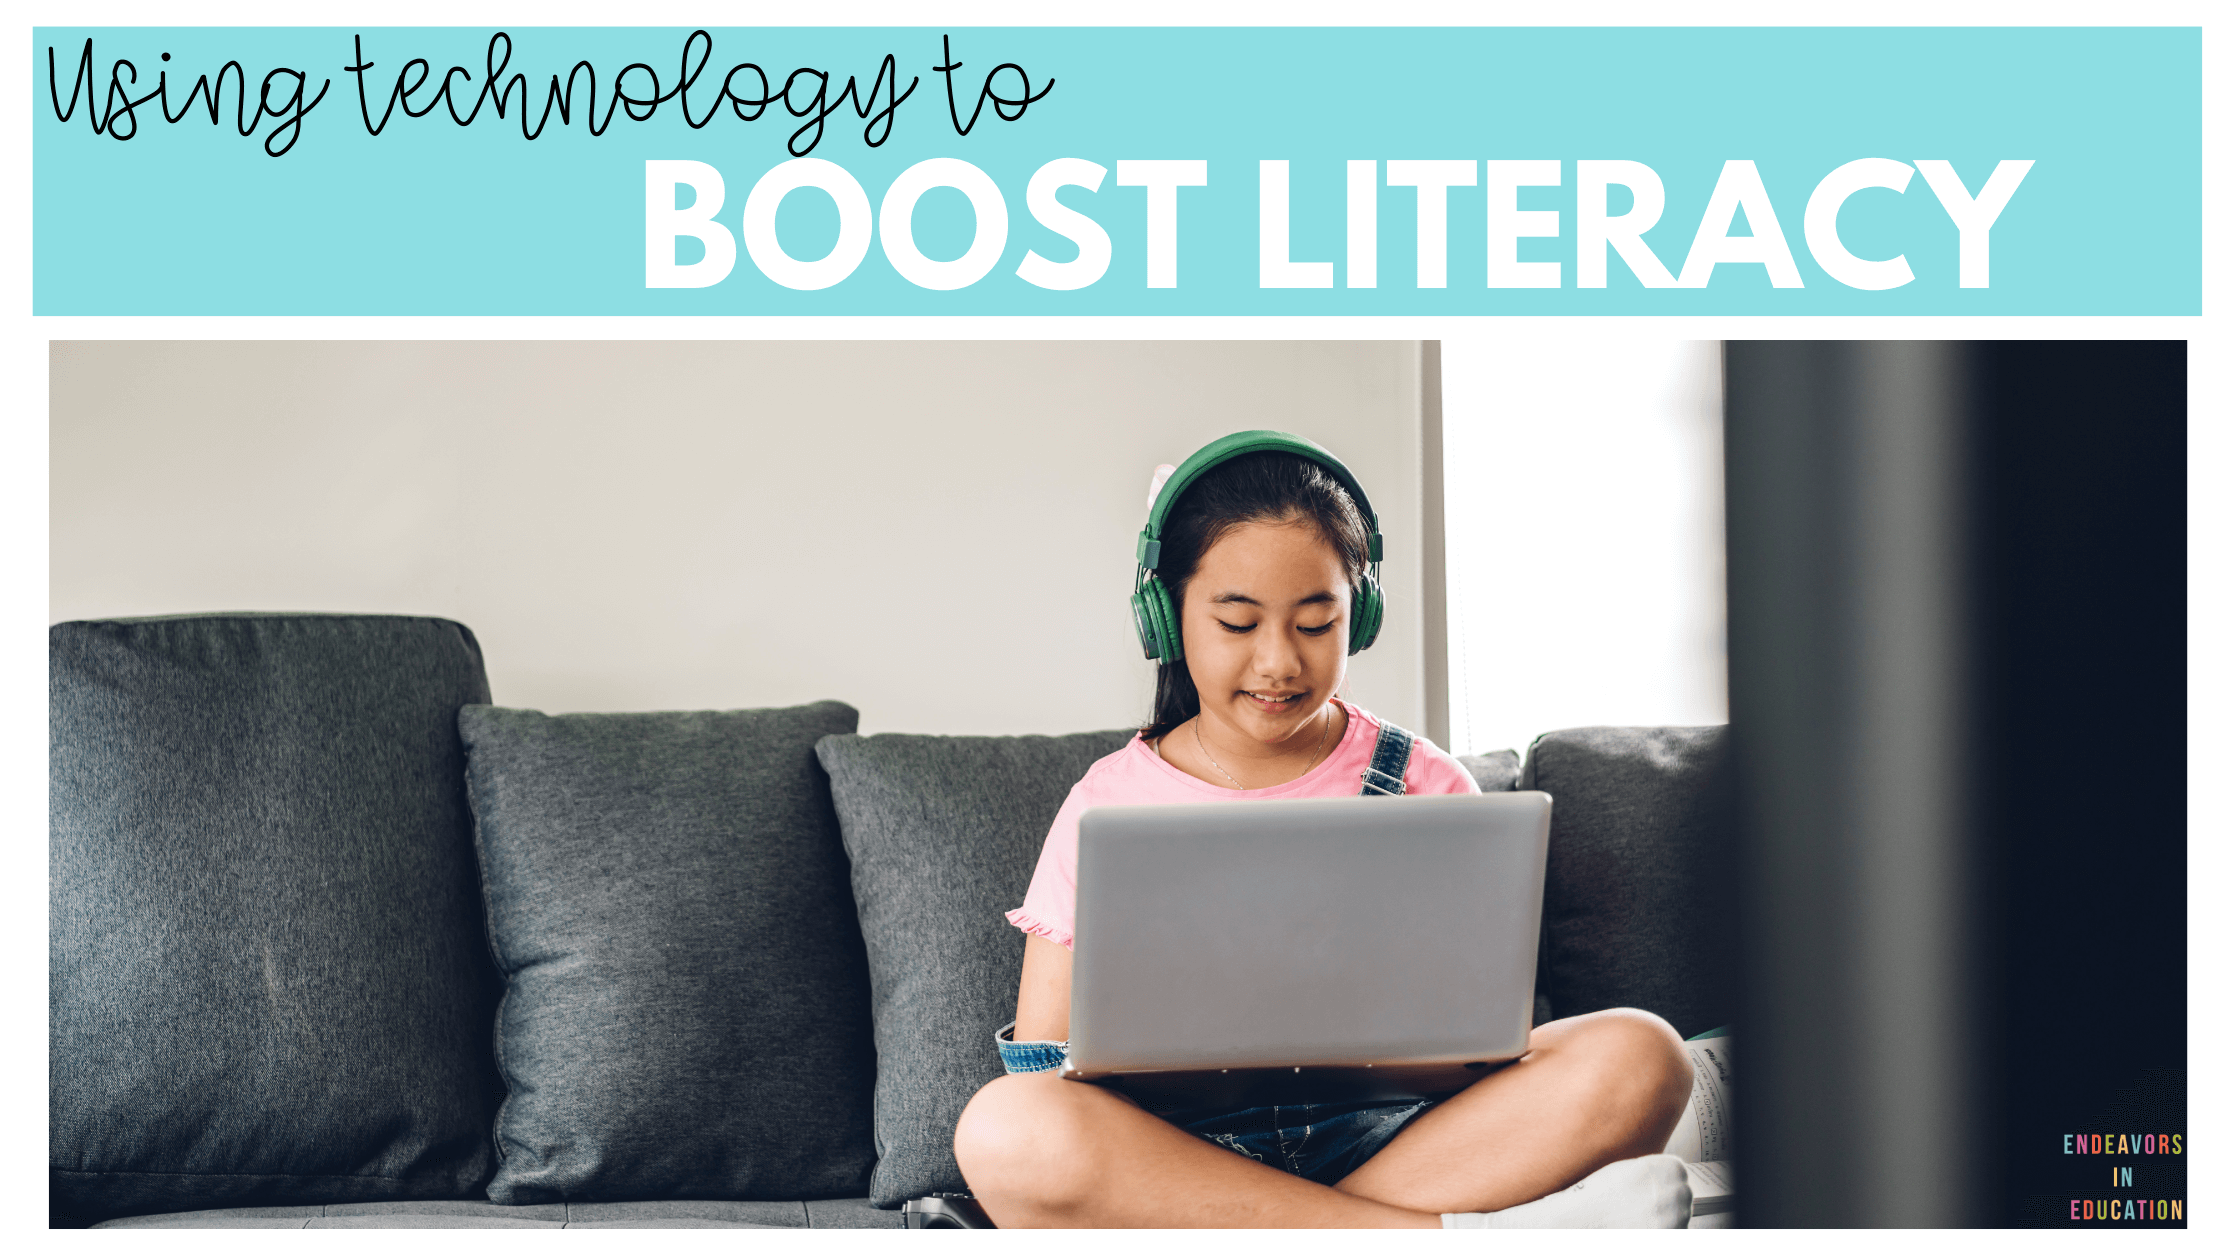 Image is of a young girl with headphones on connected to a laptop sitting on a couch. The text in the image says "using technology to boost literacy"